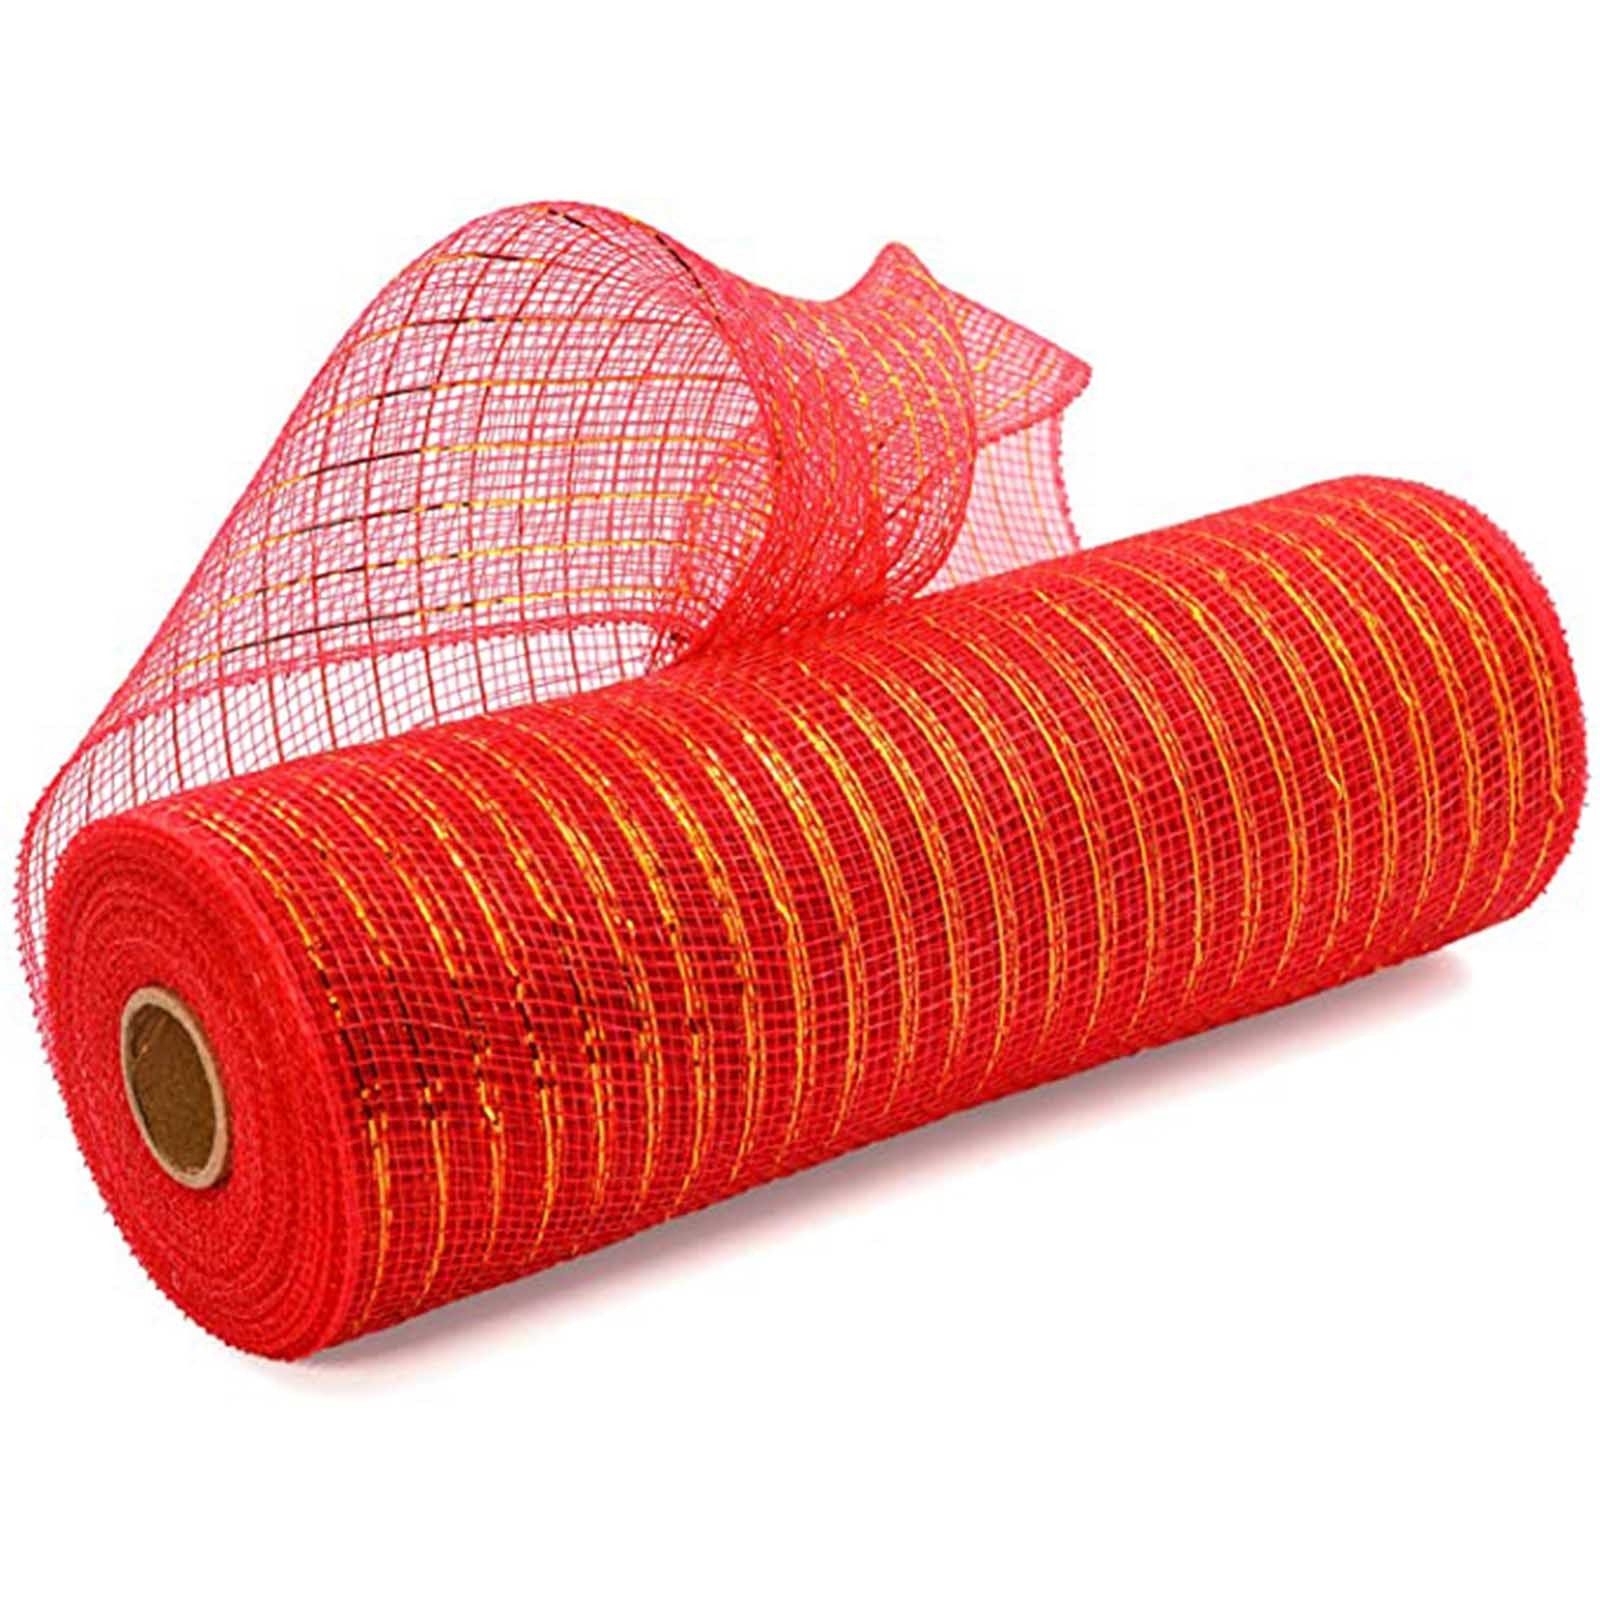 Jeashchat Red Mesh Ribbon with Foil 10 inch x 30 Feet Each Roll for Wreaths, Presents, Swags Bows Wrapping and Decorating Clearance, Size: One Size